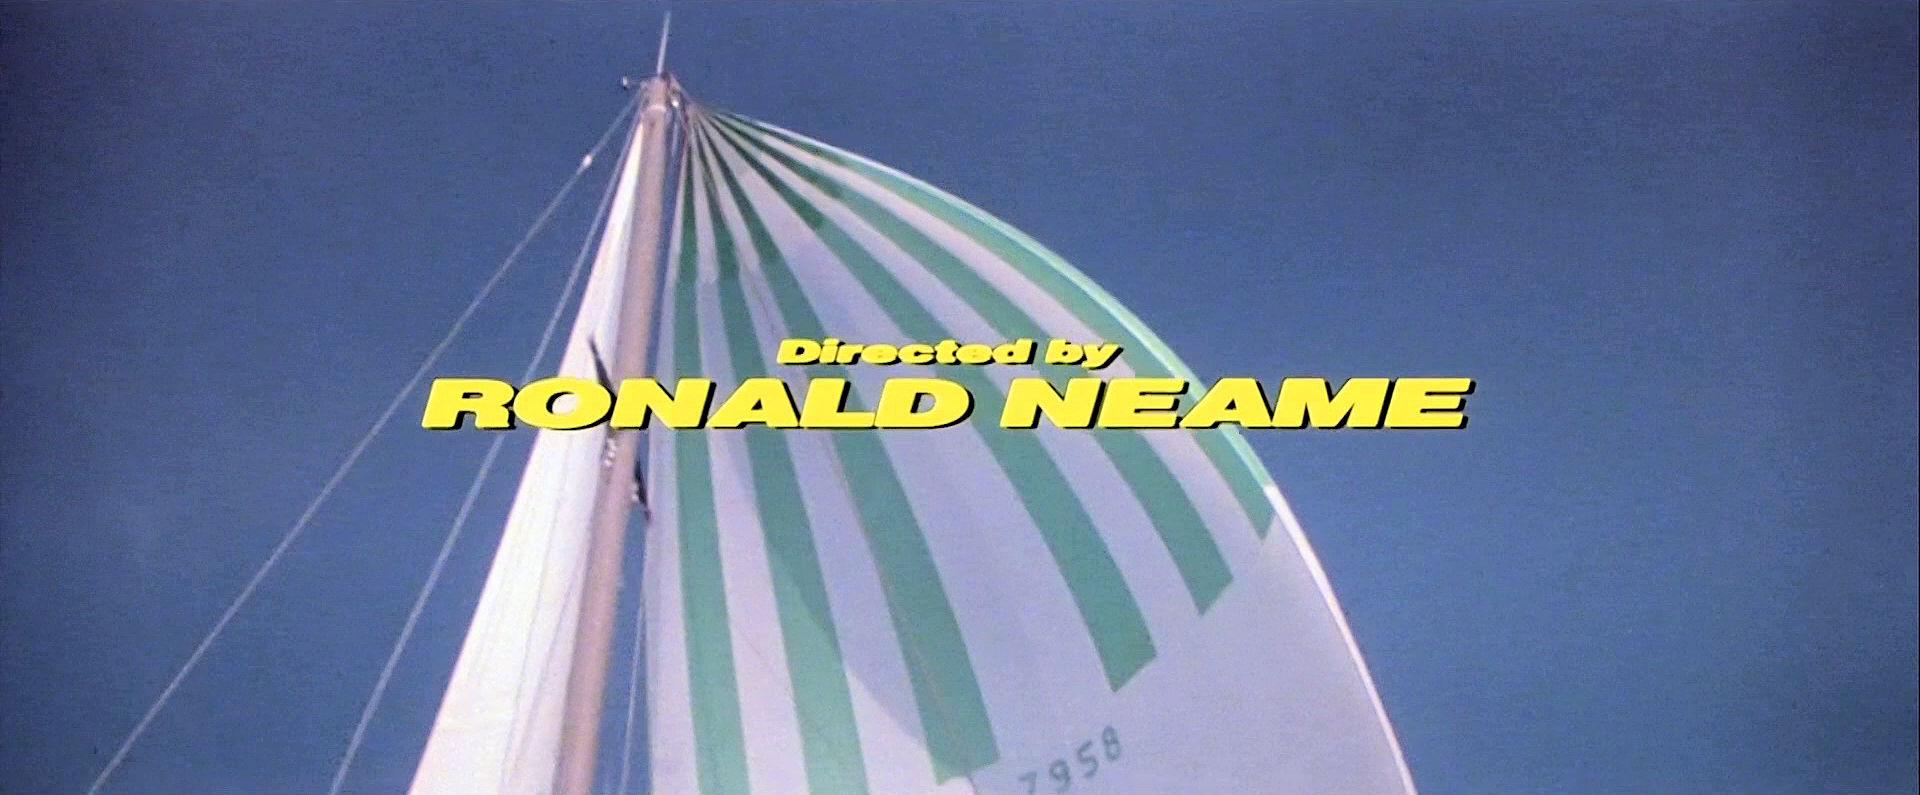 Main title from Meteor (1979) (20). Directed by Ronald Neame